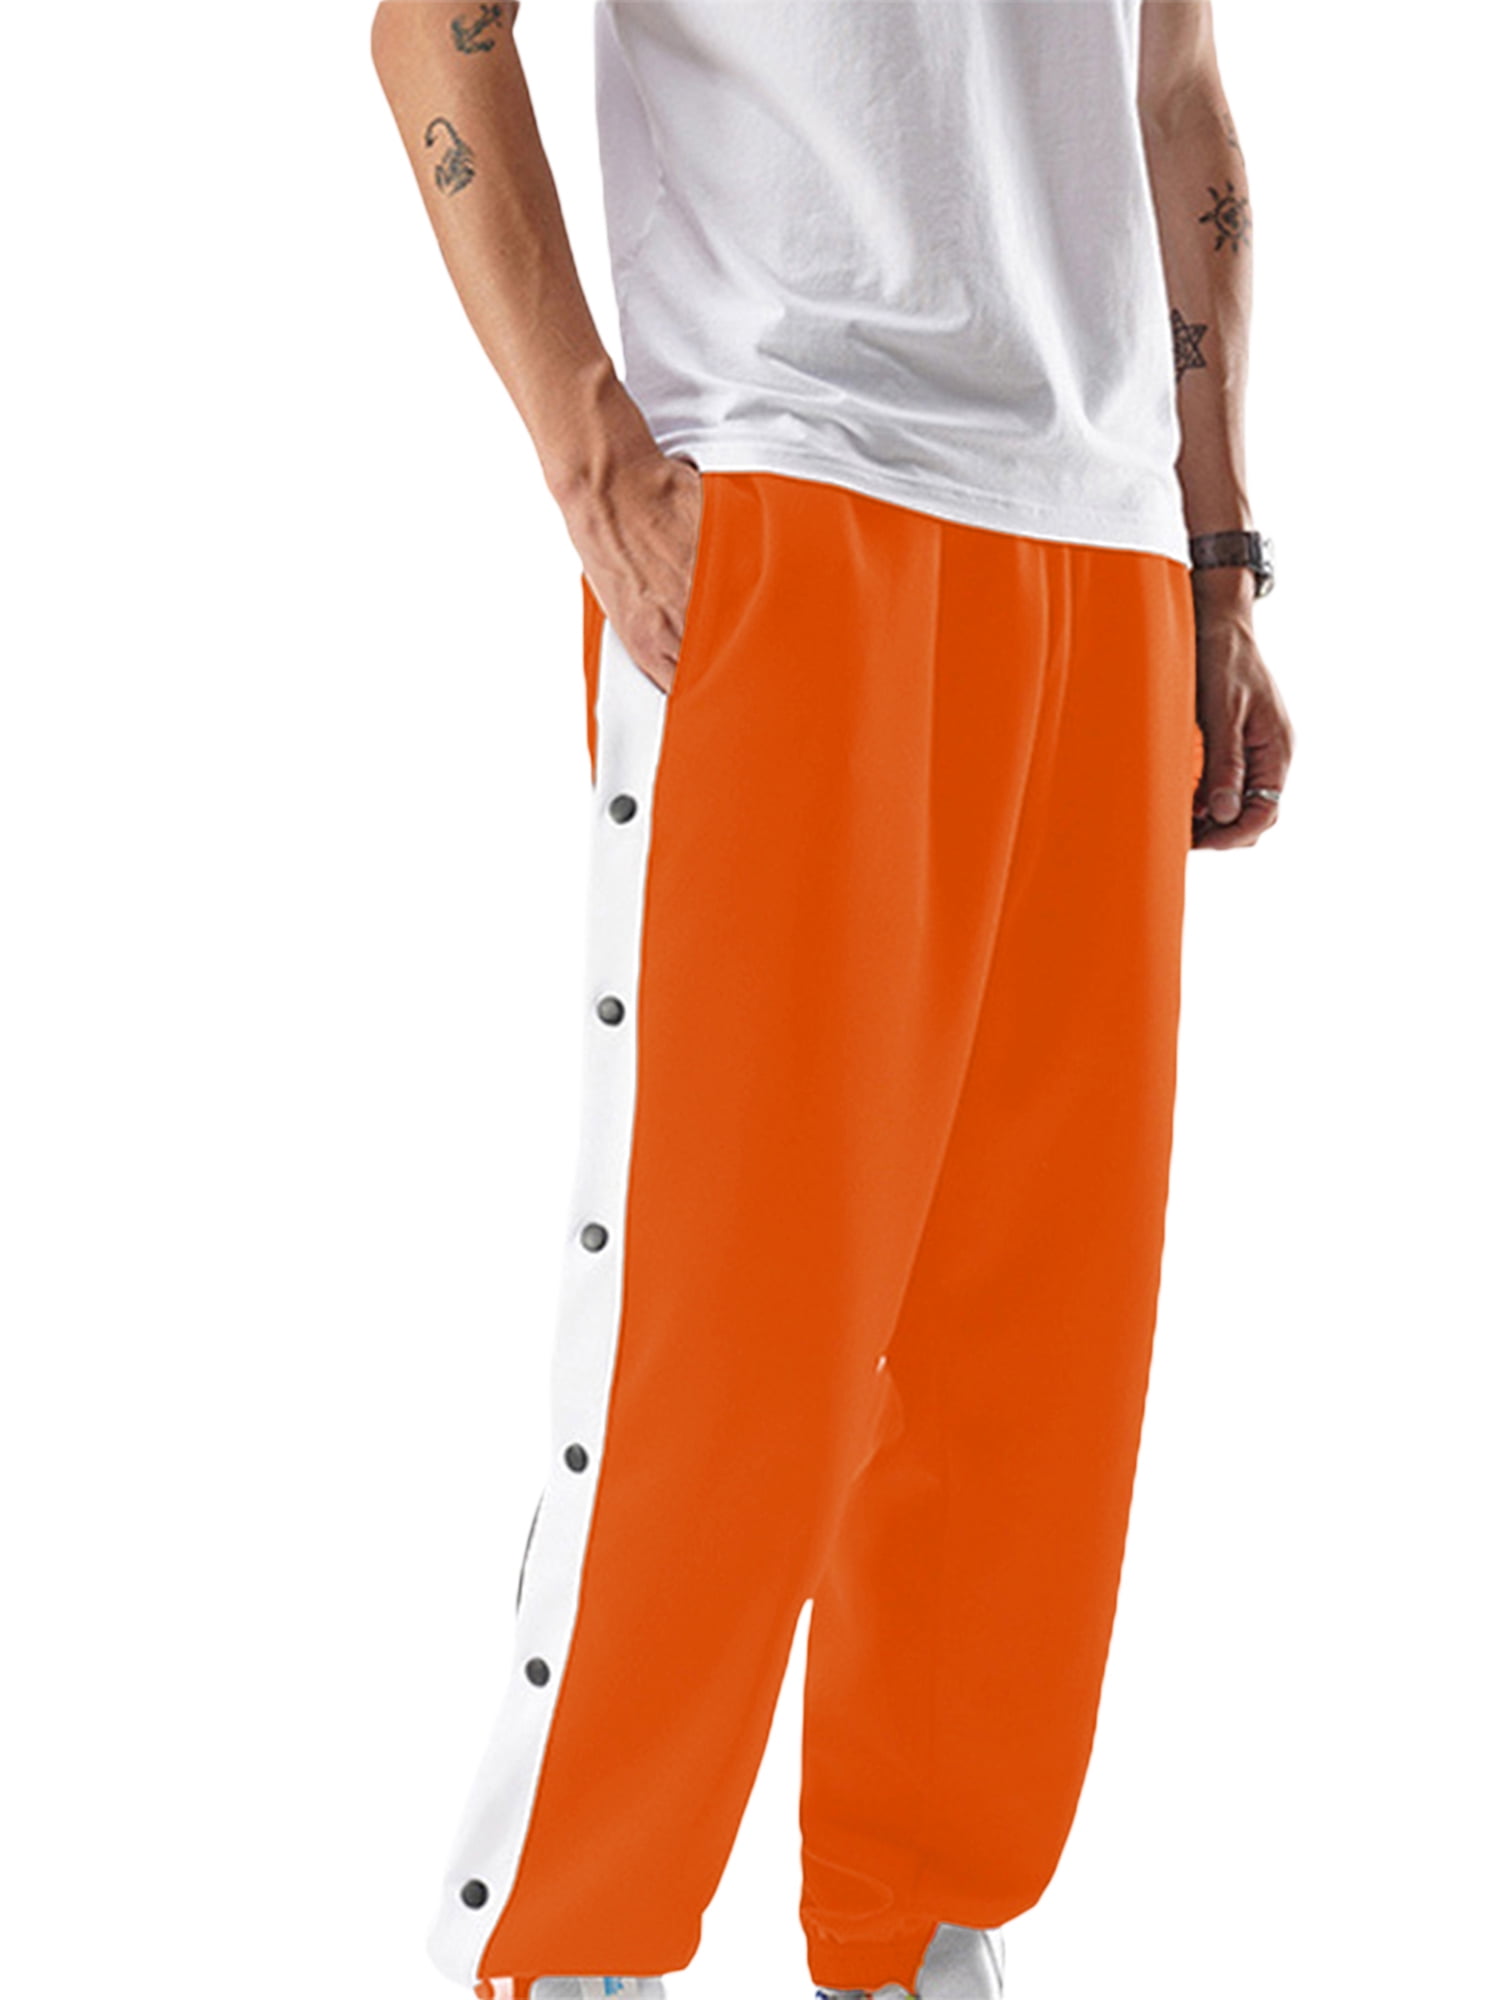  Men's Tear Away Pants Loose Fit Basketball Pants High Split Snap  Button Casual Sweatpants with Pockets (B-Black White Stripe, S) : Clothing,  Shoes & Jewelry